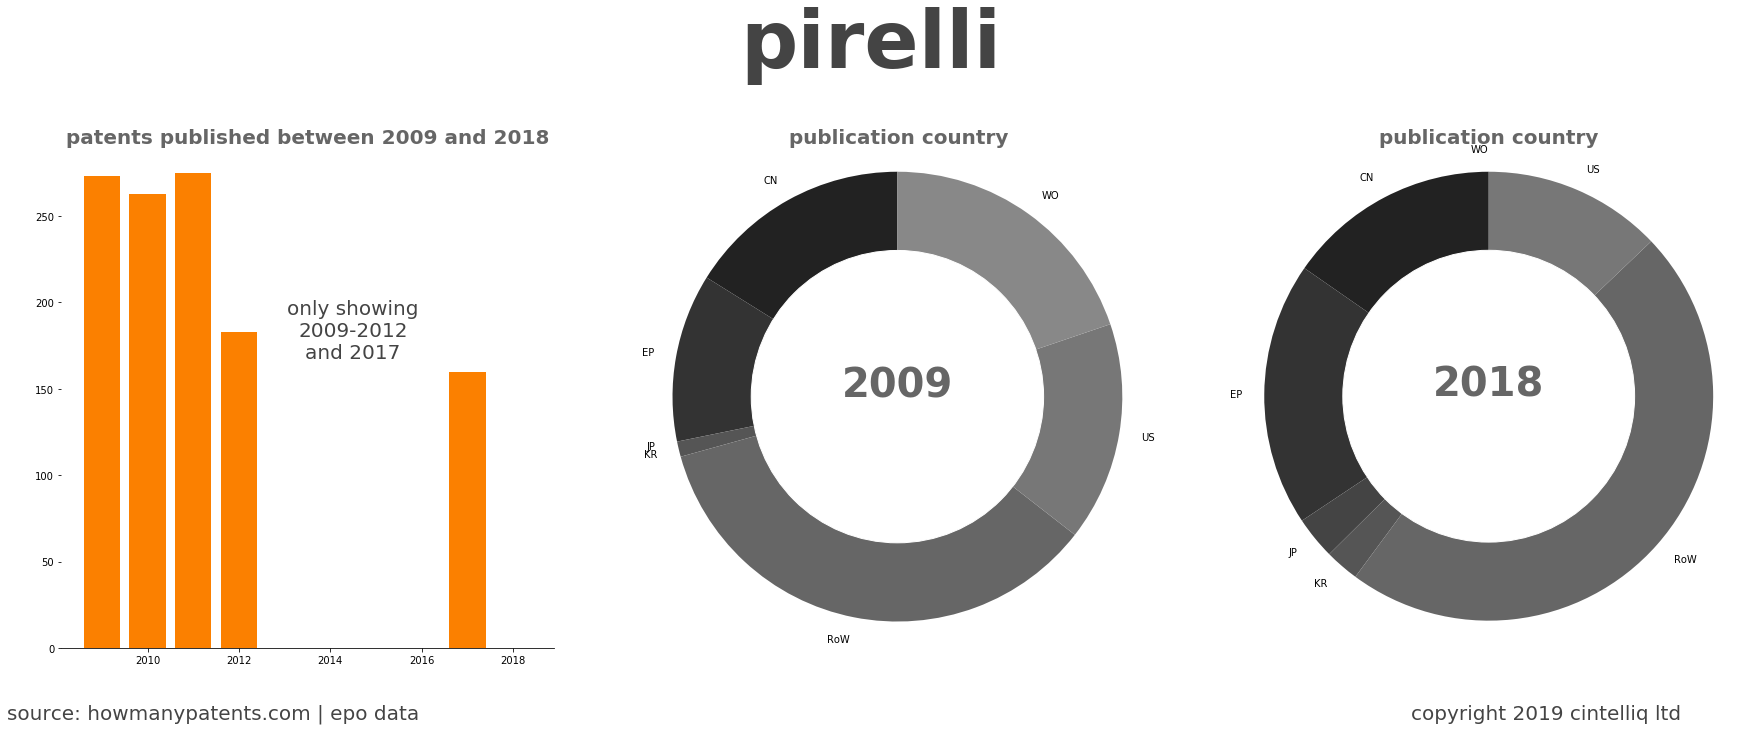 summary of patents for Pirelli